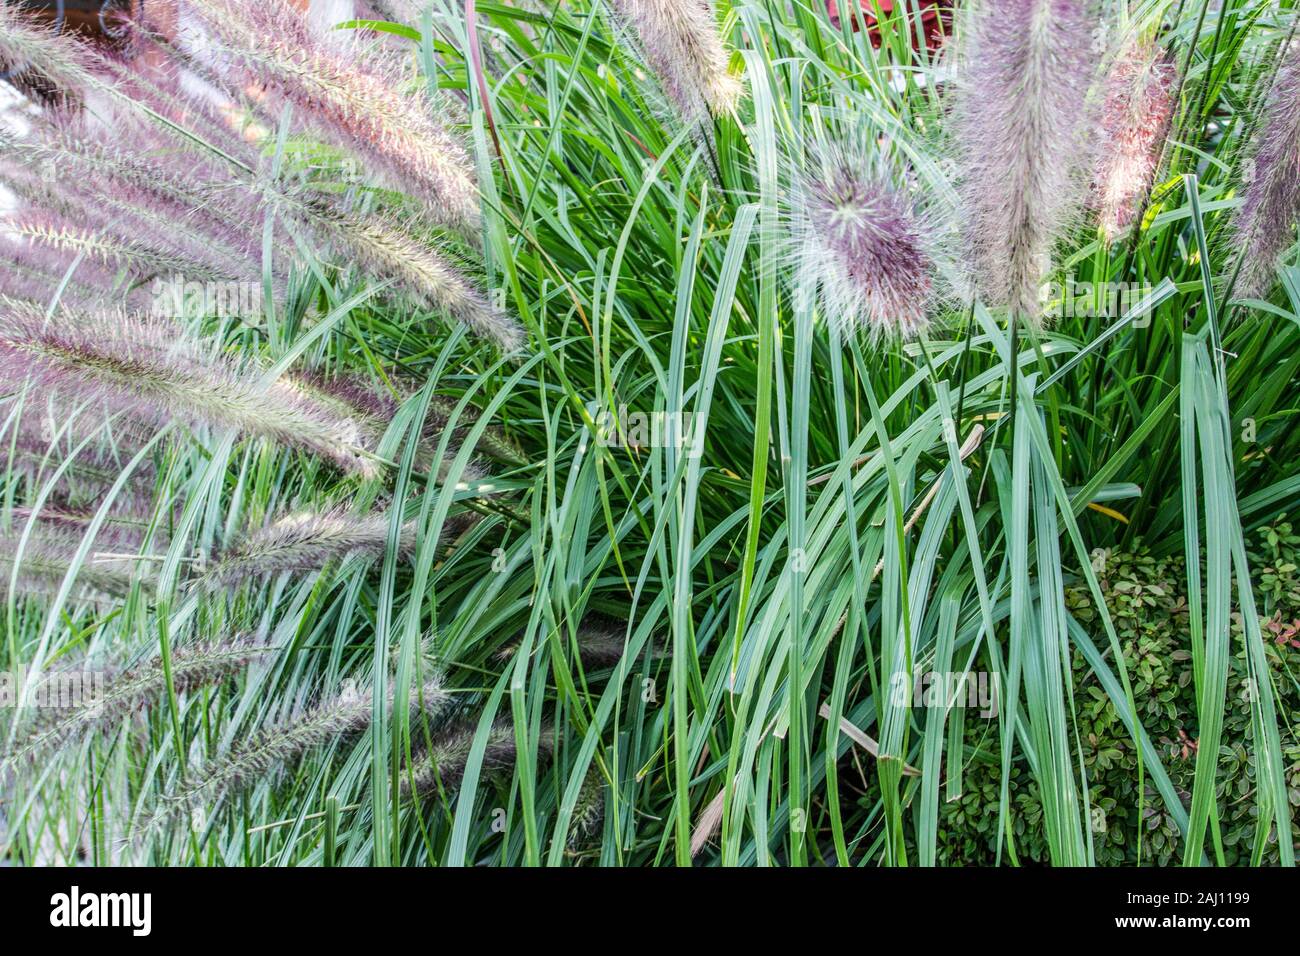 Ornamental Grass. Fountain grass is a hardy perennial ornamental grass used in yards for landscaping. Stock Photo